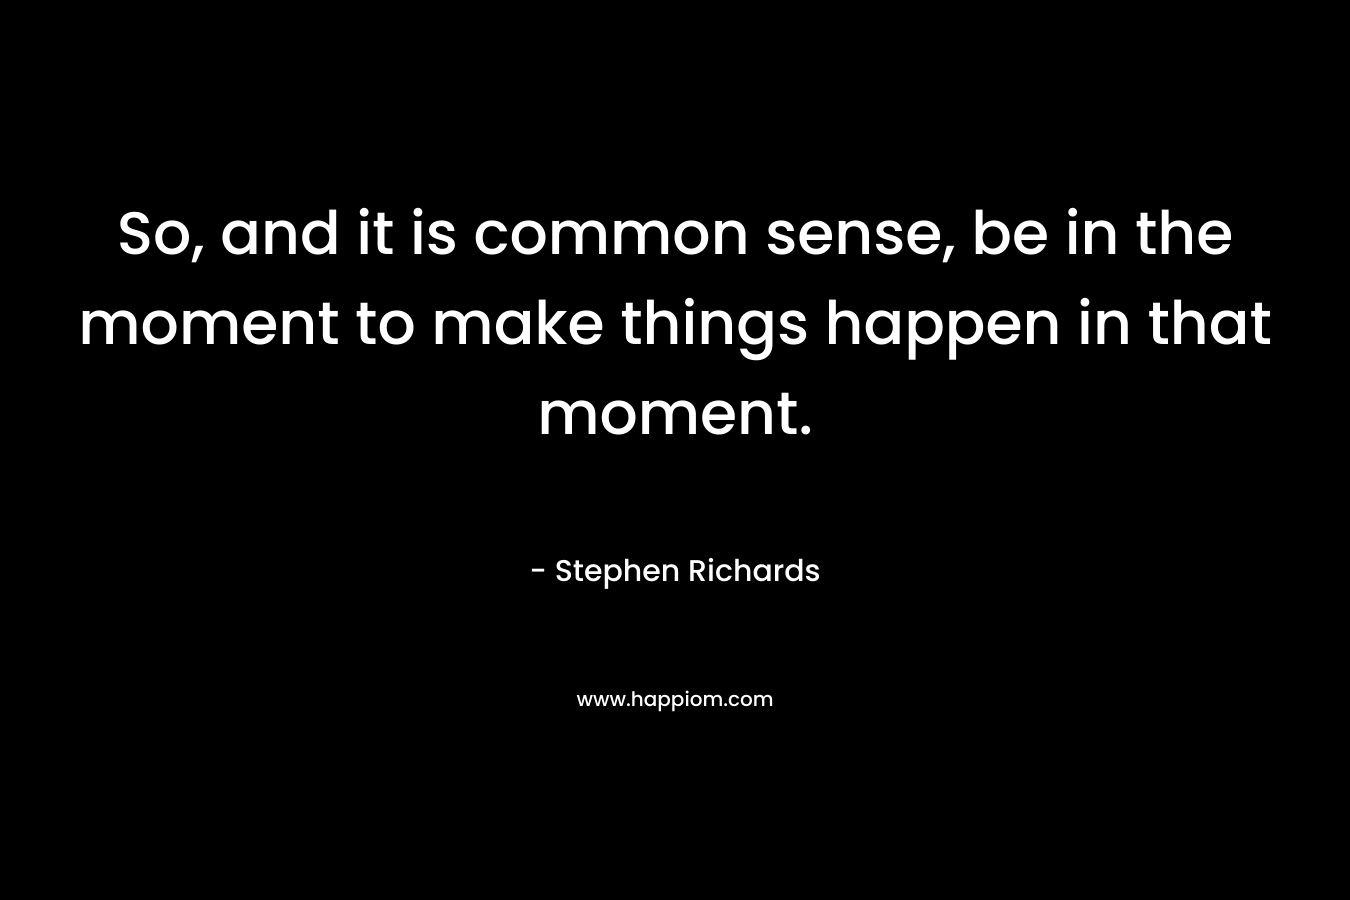 So, and it is common sense, be in the moment to make things happen in that moment.